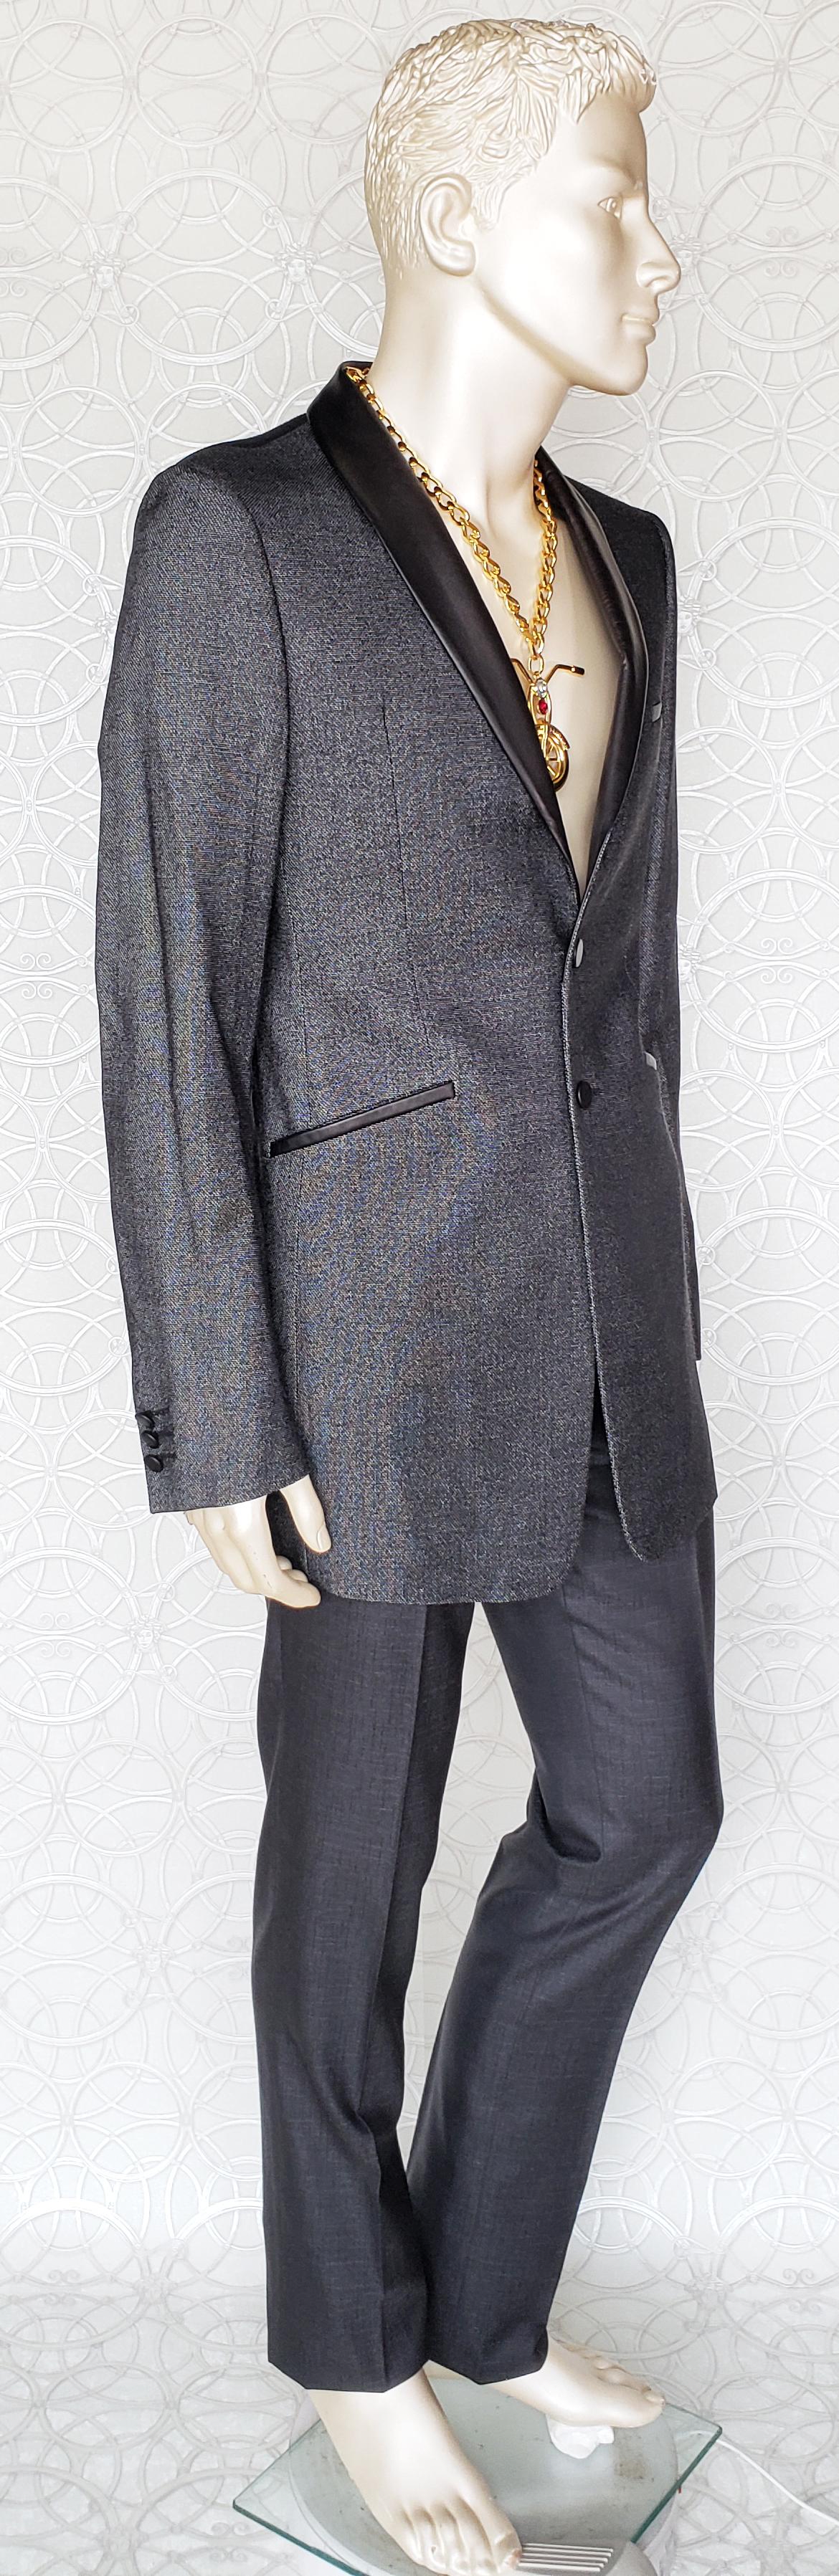 Men's S/S 2011 look #7 NEW VERSACE GRAY WOOL and SILK SUIT 48 - 38 (M) For Sale